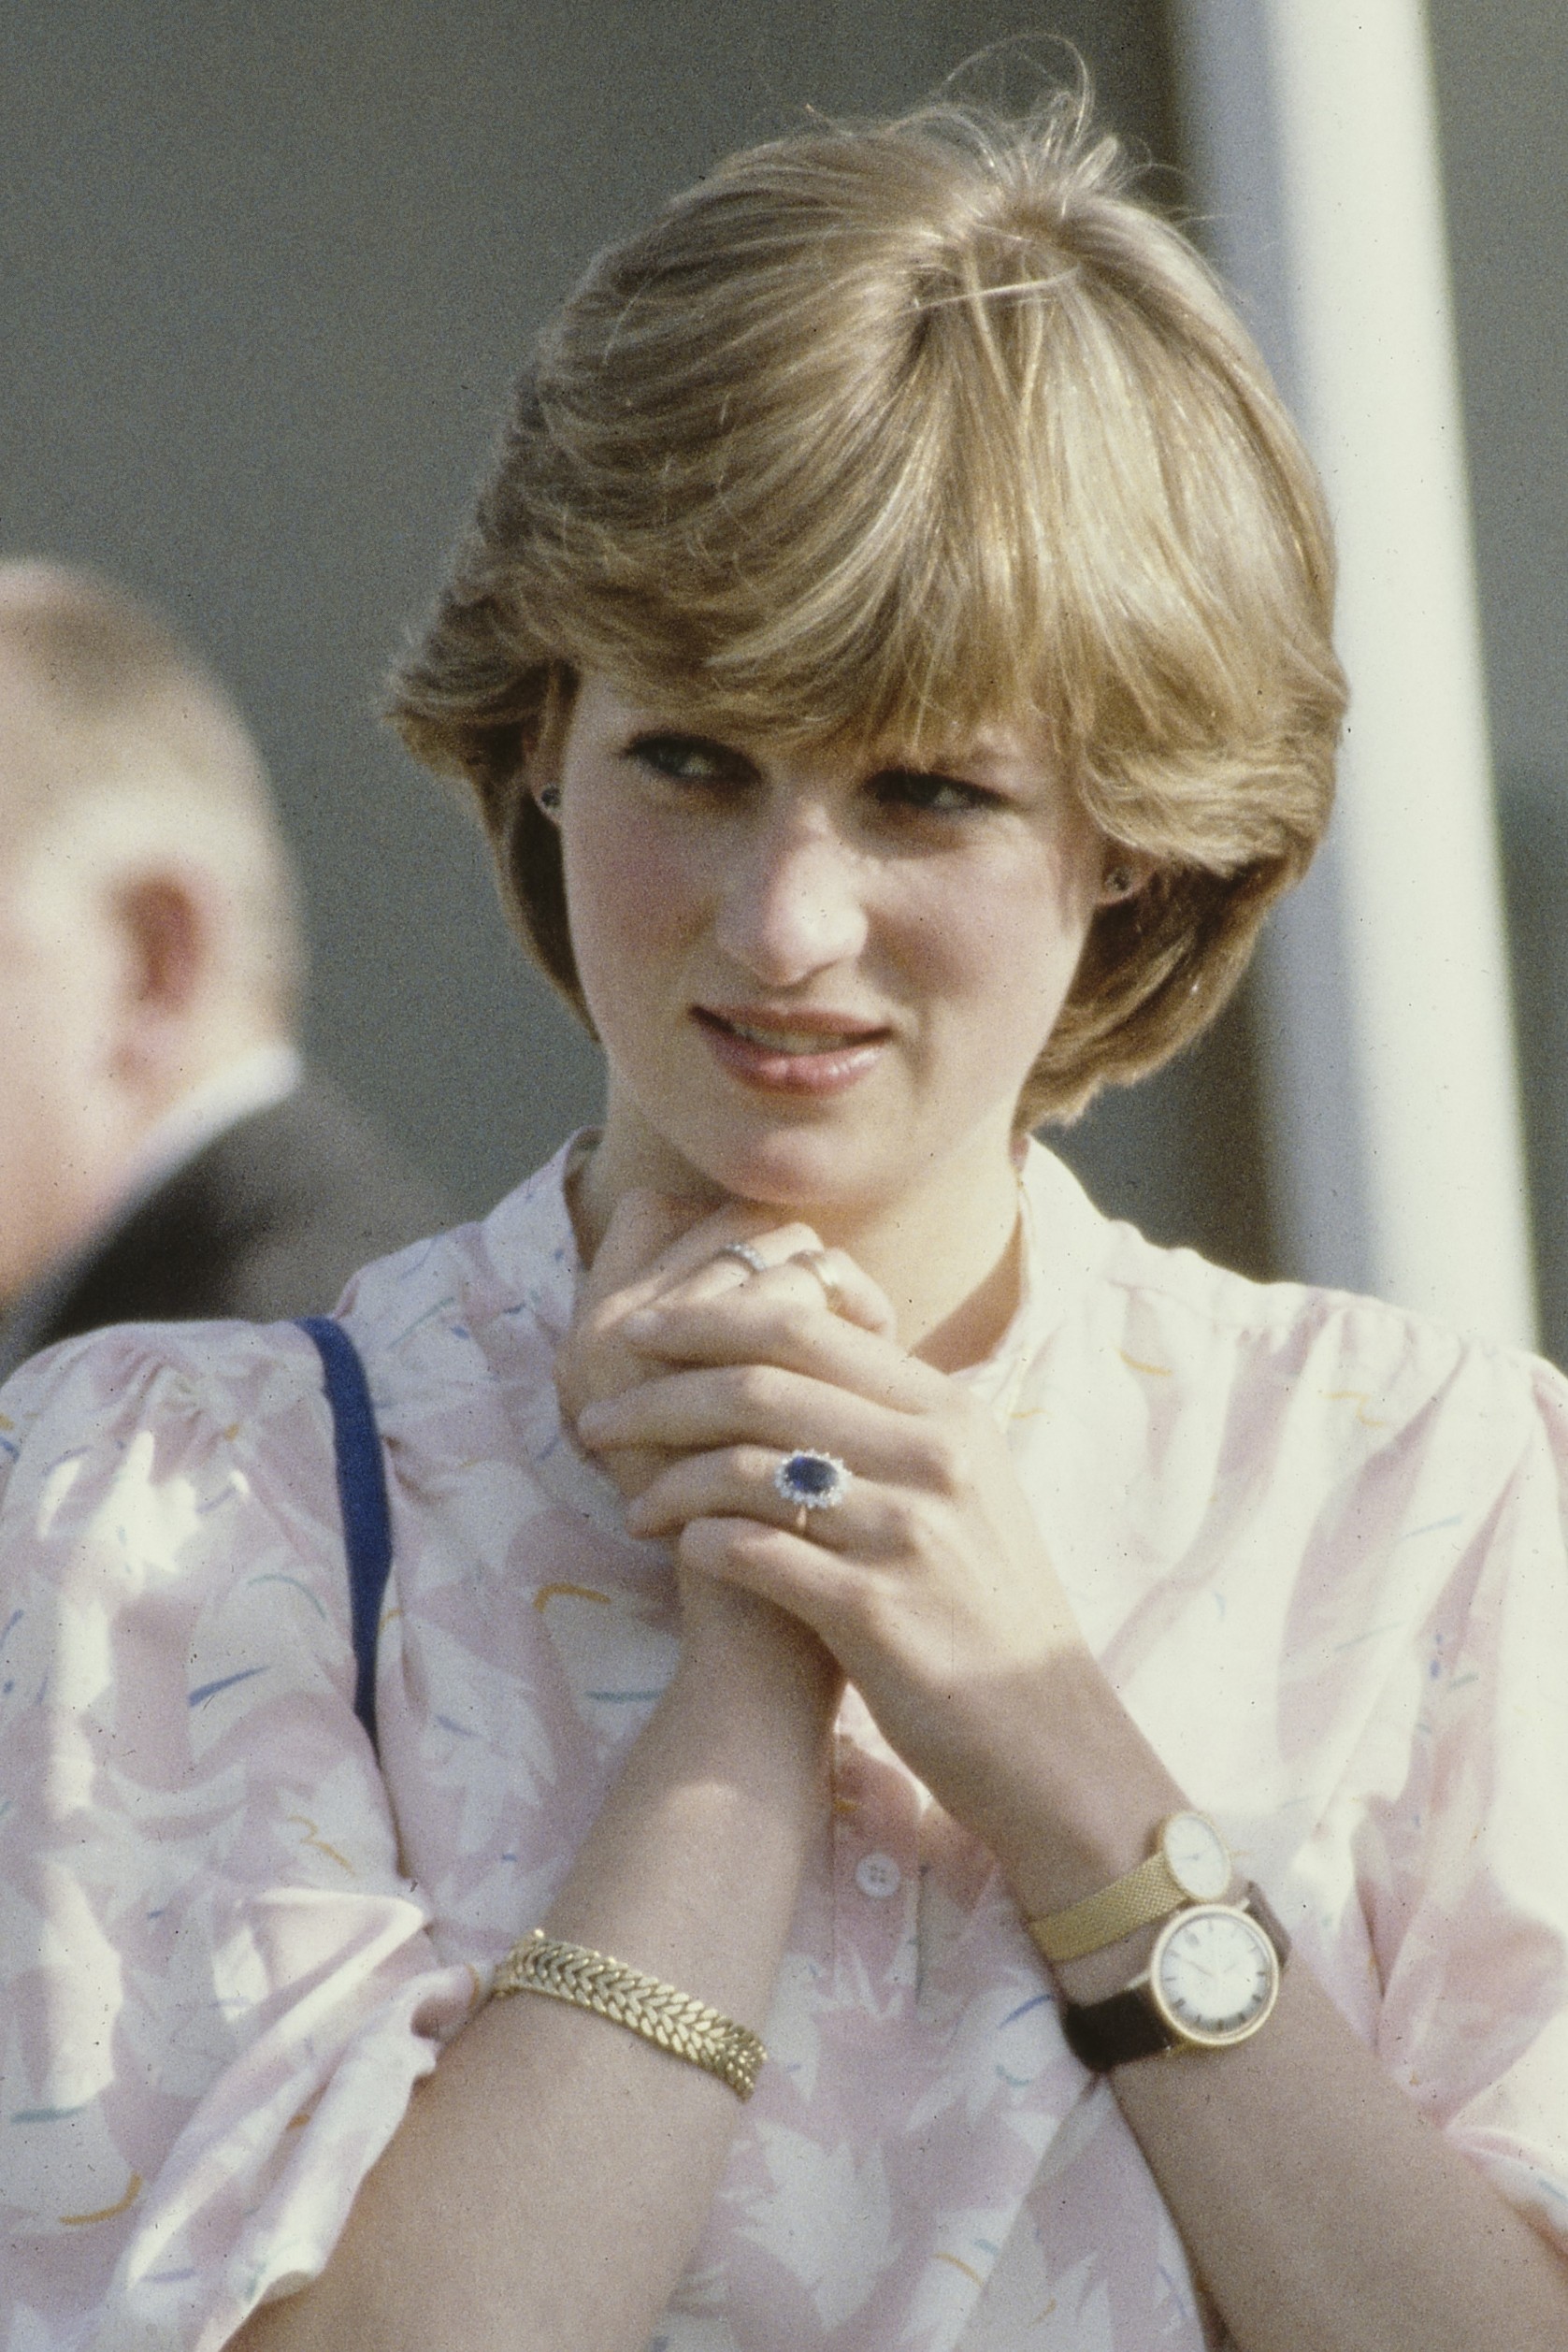 Lady Diana Spencer, later Diana, Princess of Wales  (1961 - 1997) watching Prince Charles play polo at Windsor, UK, with Princess Anne (right), shortly before their wedding, 26th July 1981. Diana is wearing a gold bracelet and a new watch, both gifts from (Foto: Getty Images)